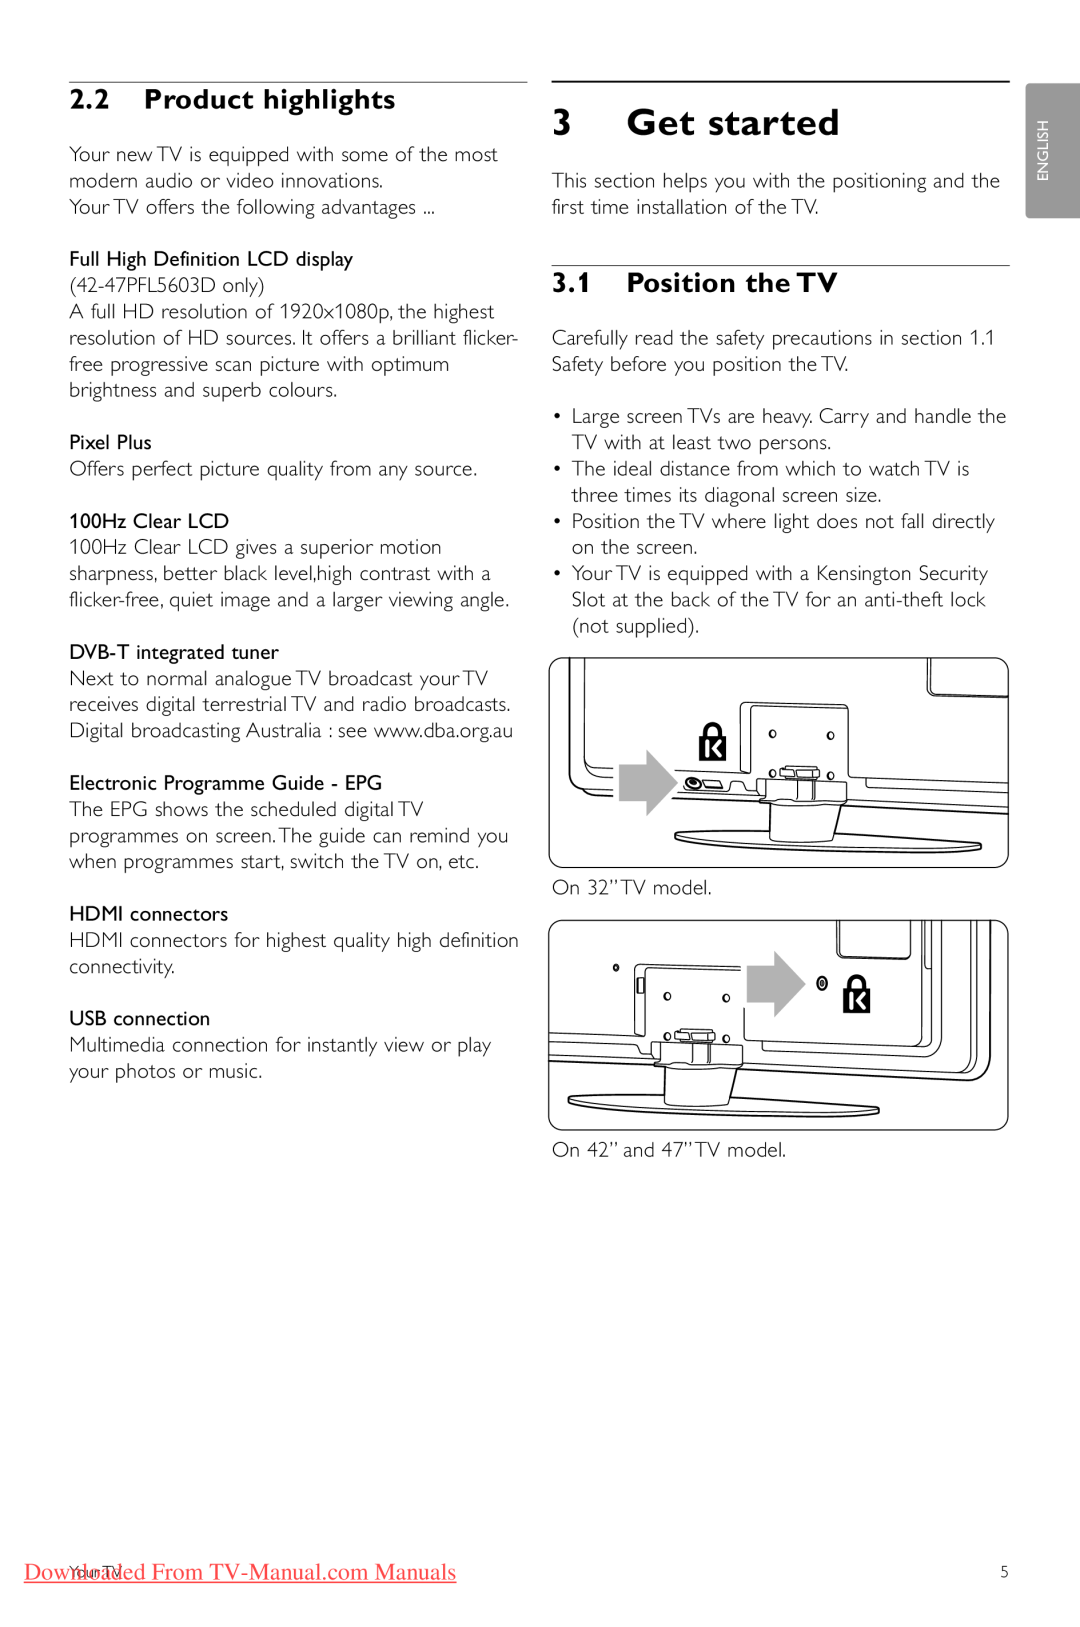 Philips 32PFL7403, 42PFL5403 Get started, 2.2Product highlights, 3.1Position the TV, Downloaded From TV-Manual.comManuals 